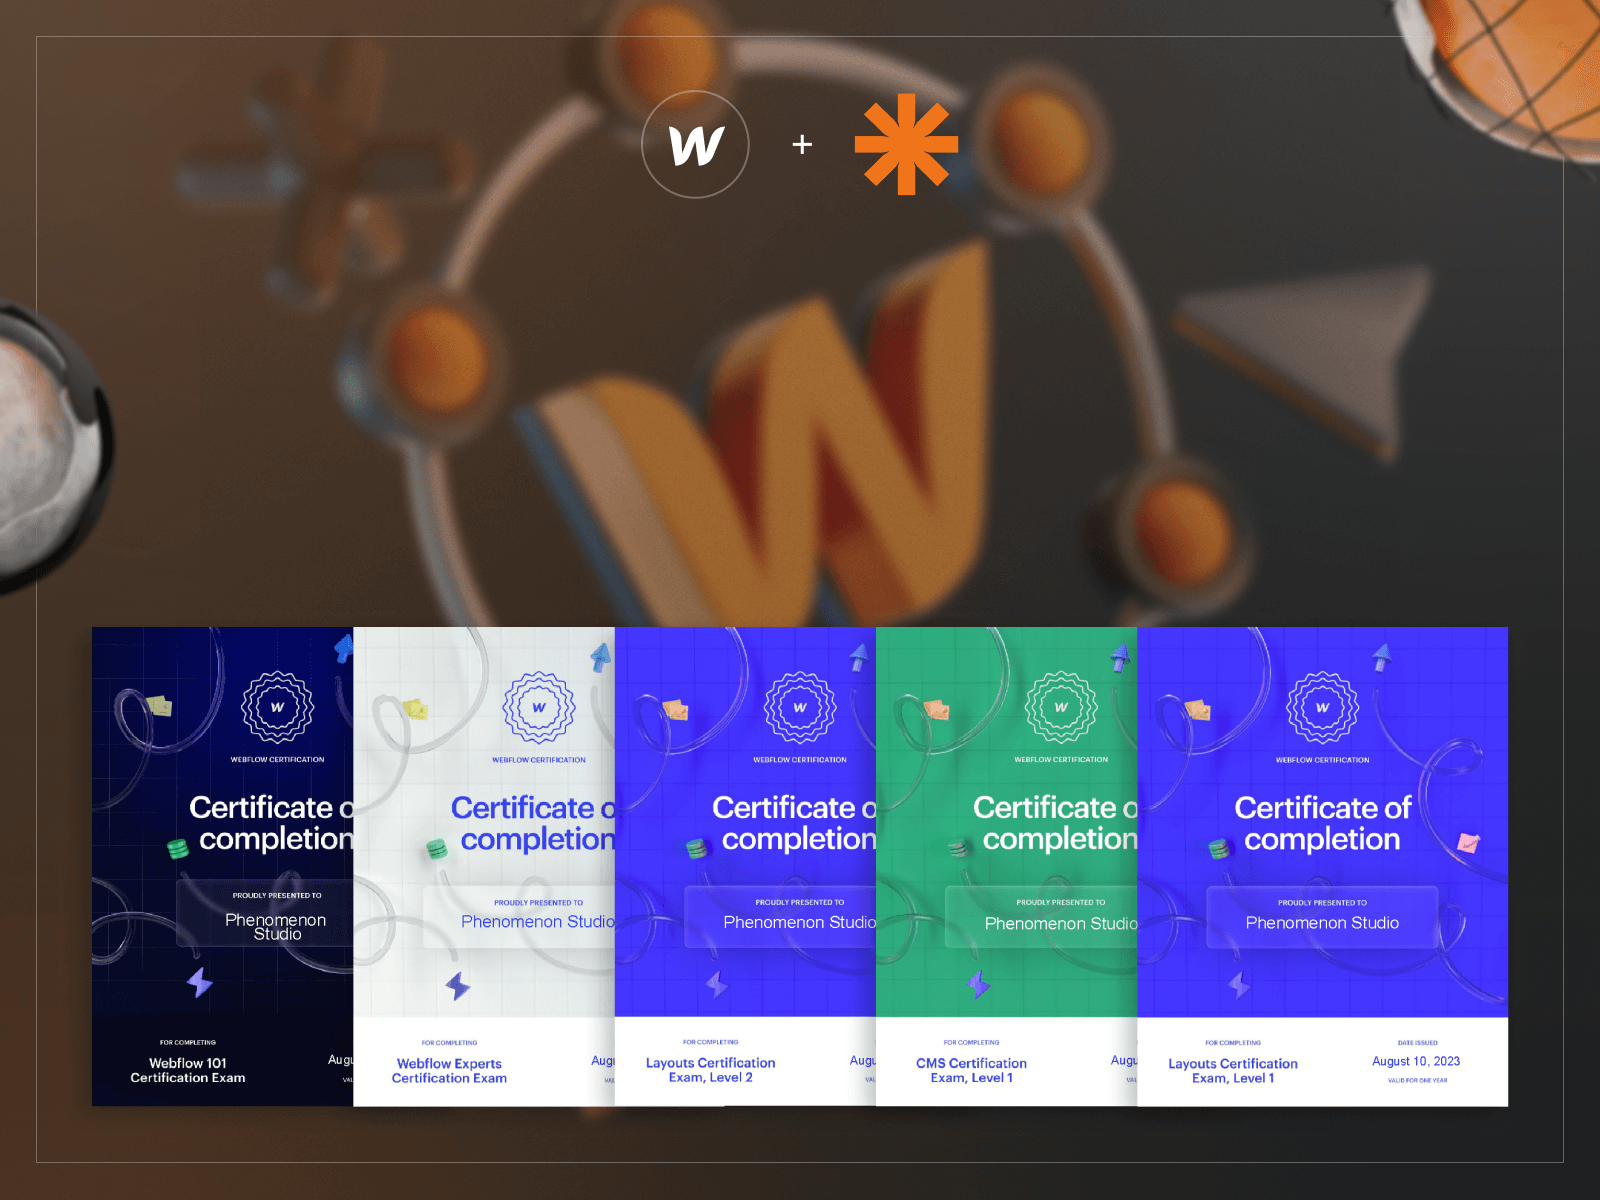 Phenomenon has received newly released Webflow certificates - Photo 0